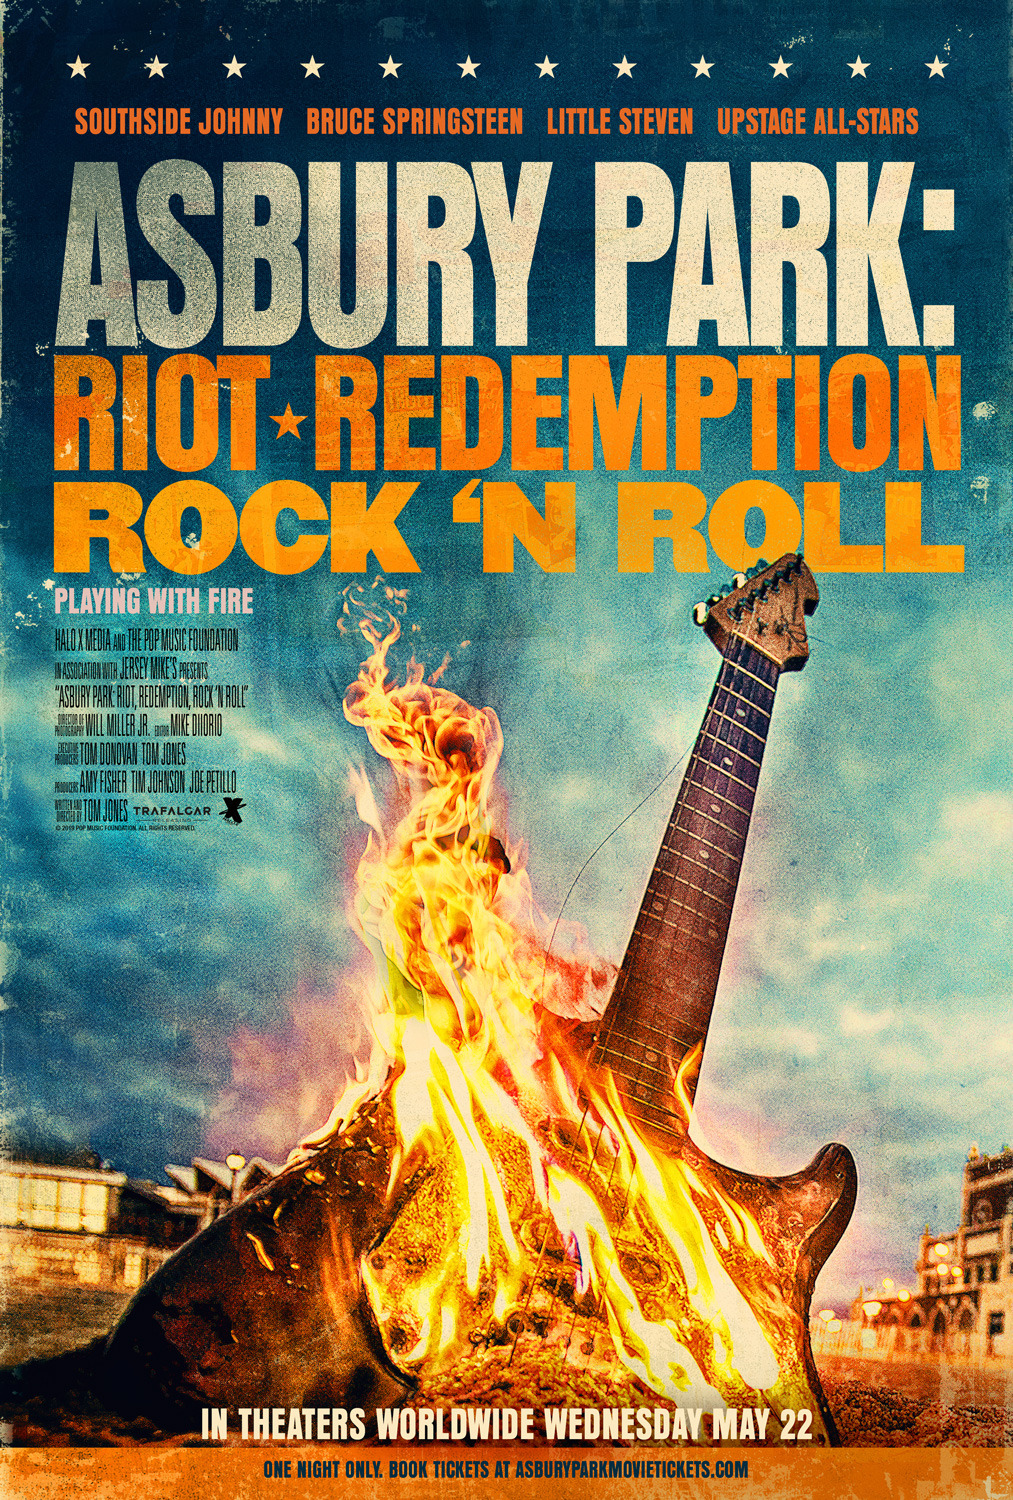 Extra Large Movie Poster Image for Asbury Park: Riot, Redemption, Rock 'n Roll 